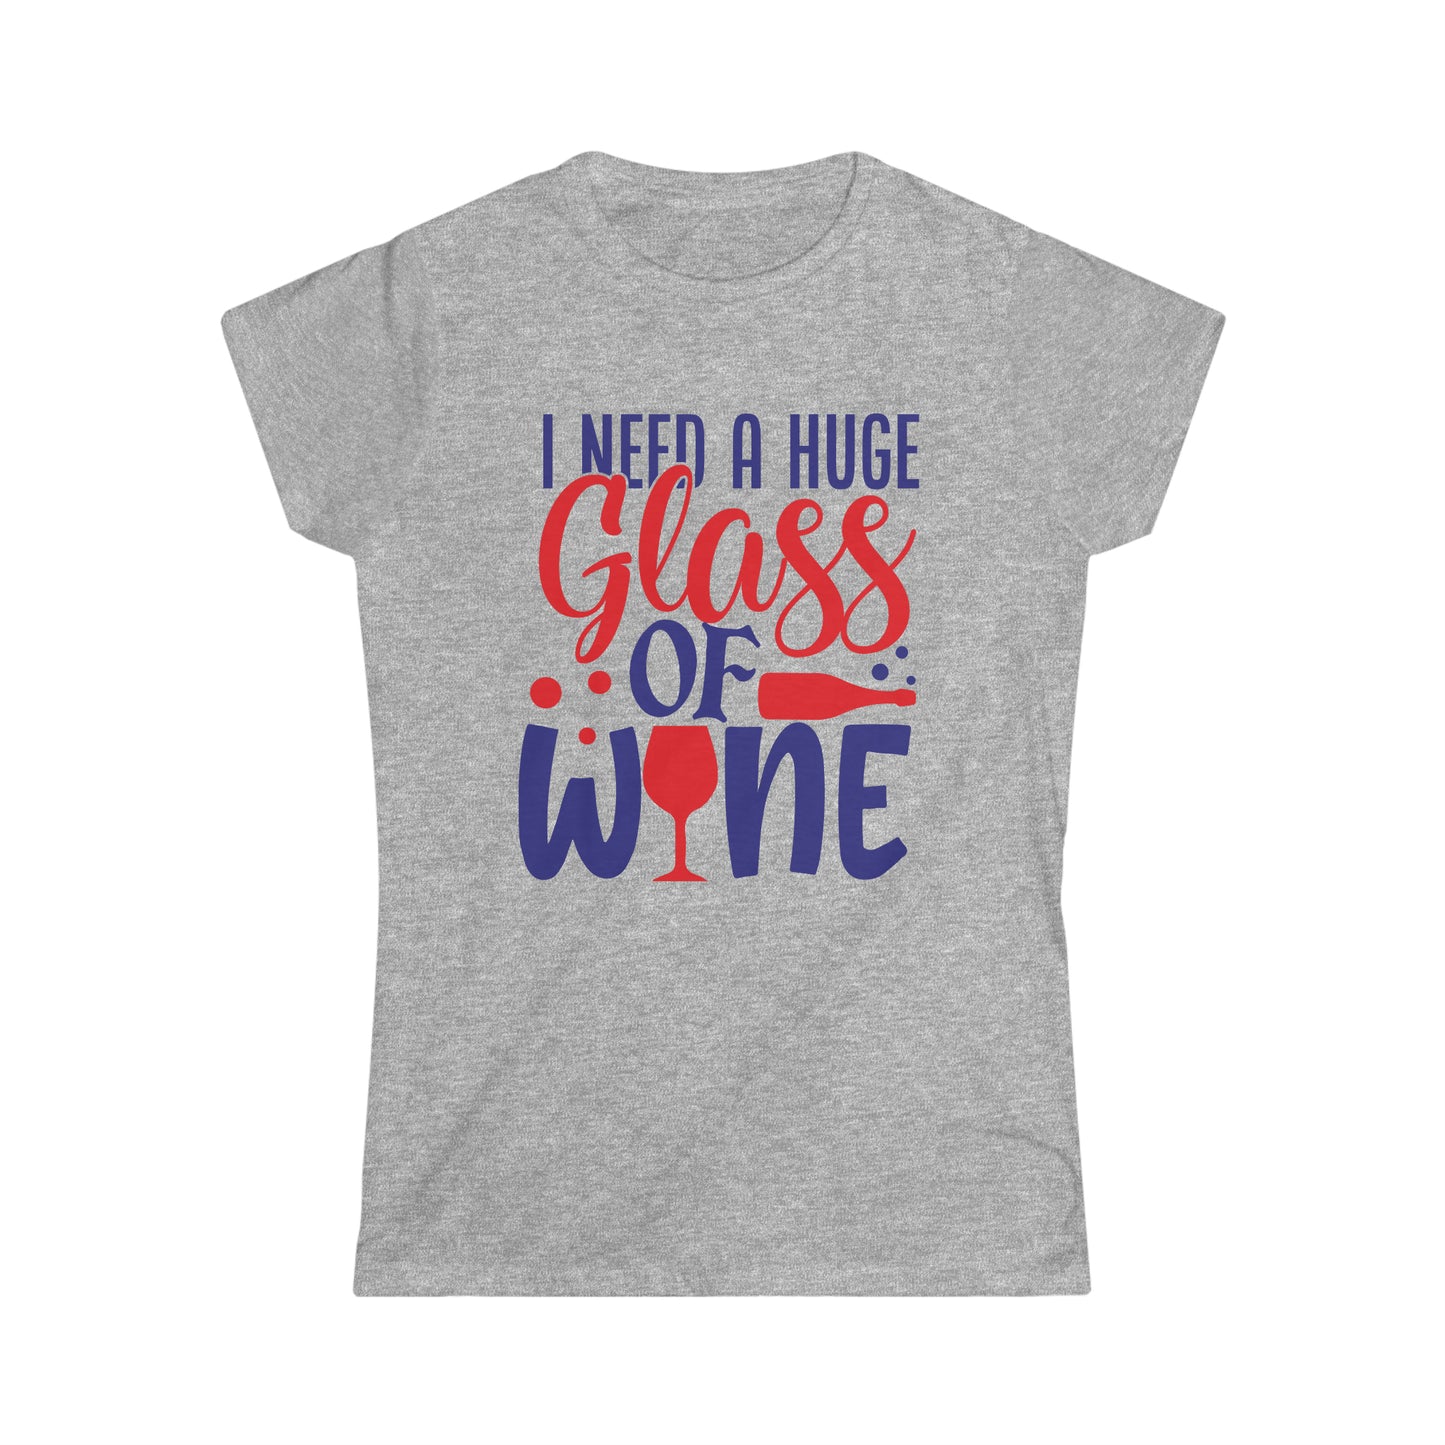 "I Need A Huge Glass Of Wine" Women's Softstyle Tee